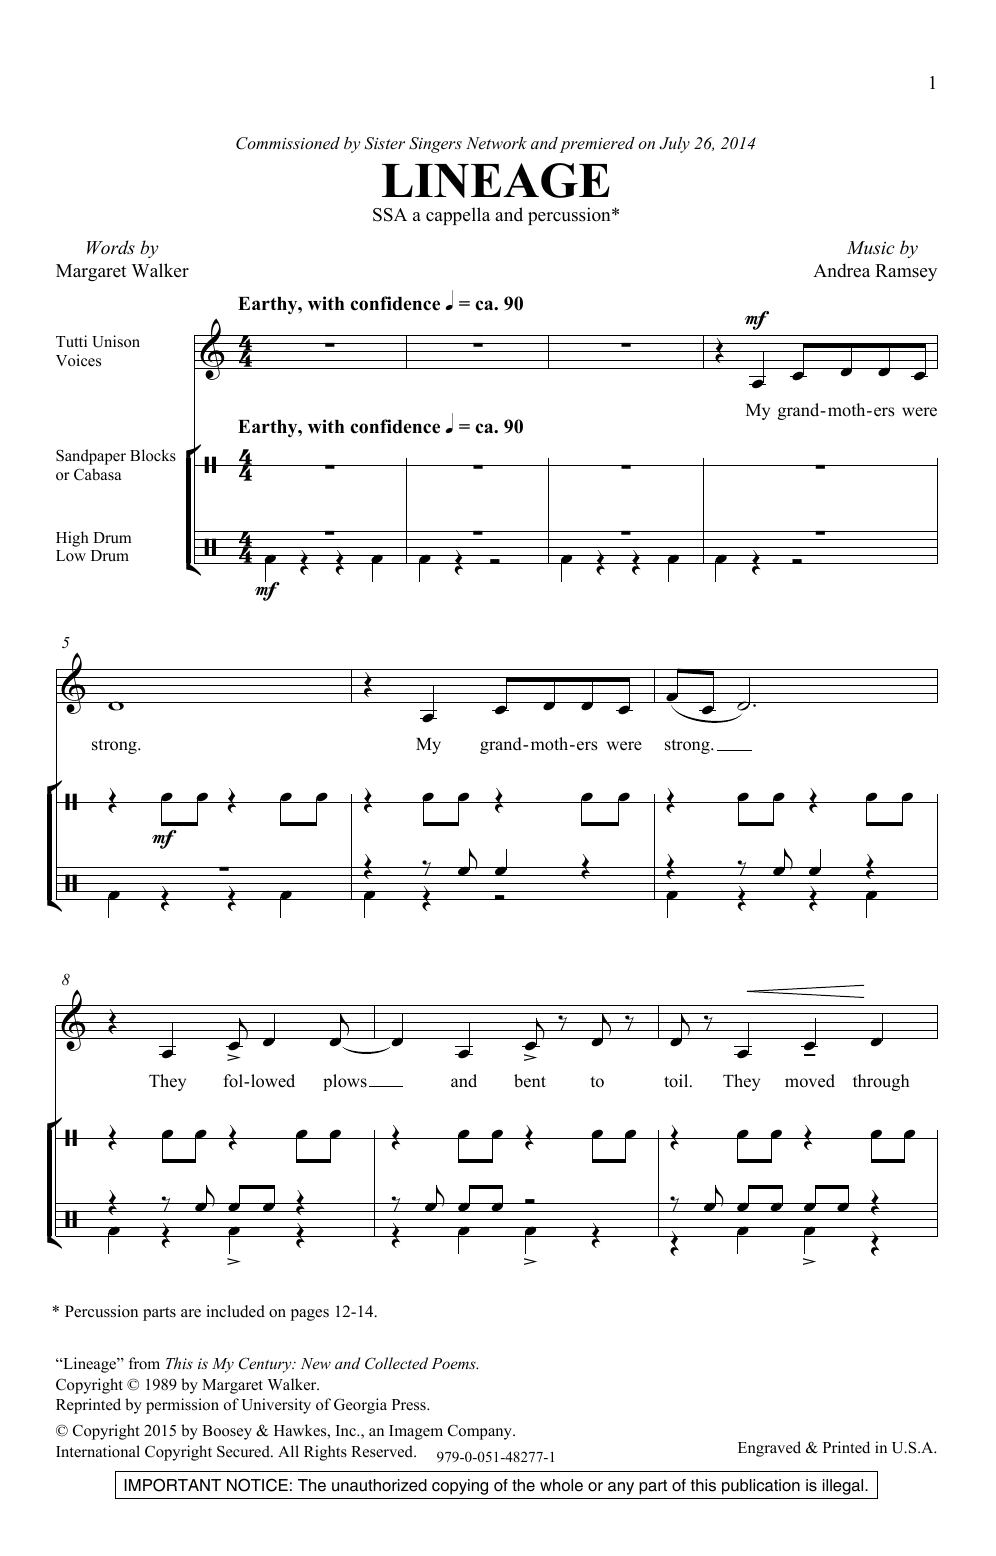 Download Andrea Ramsey Lineage Sheet Music